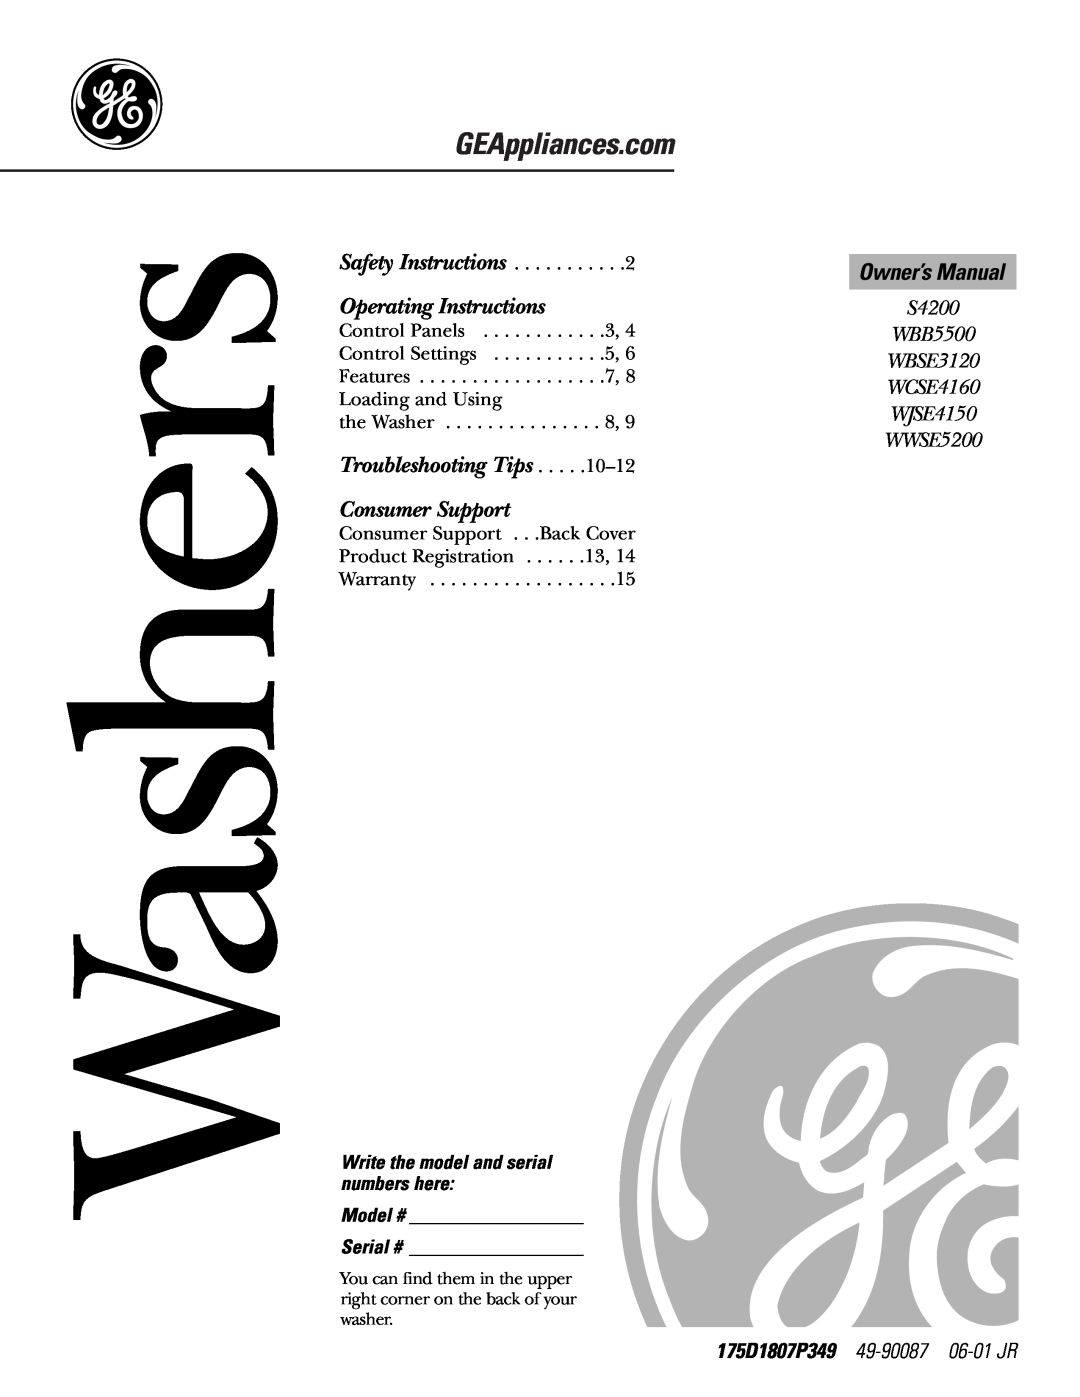 GE S4200 owner manual Owner’s Manual, 175D1807P414 49-90150 09-02JR, Washers, Operating Instructions, Consumer Support 